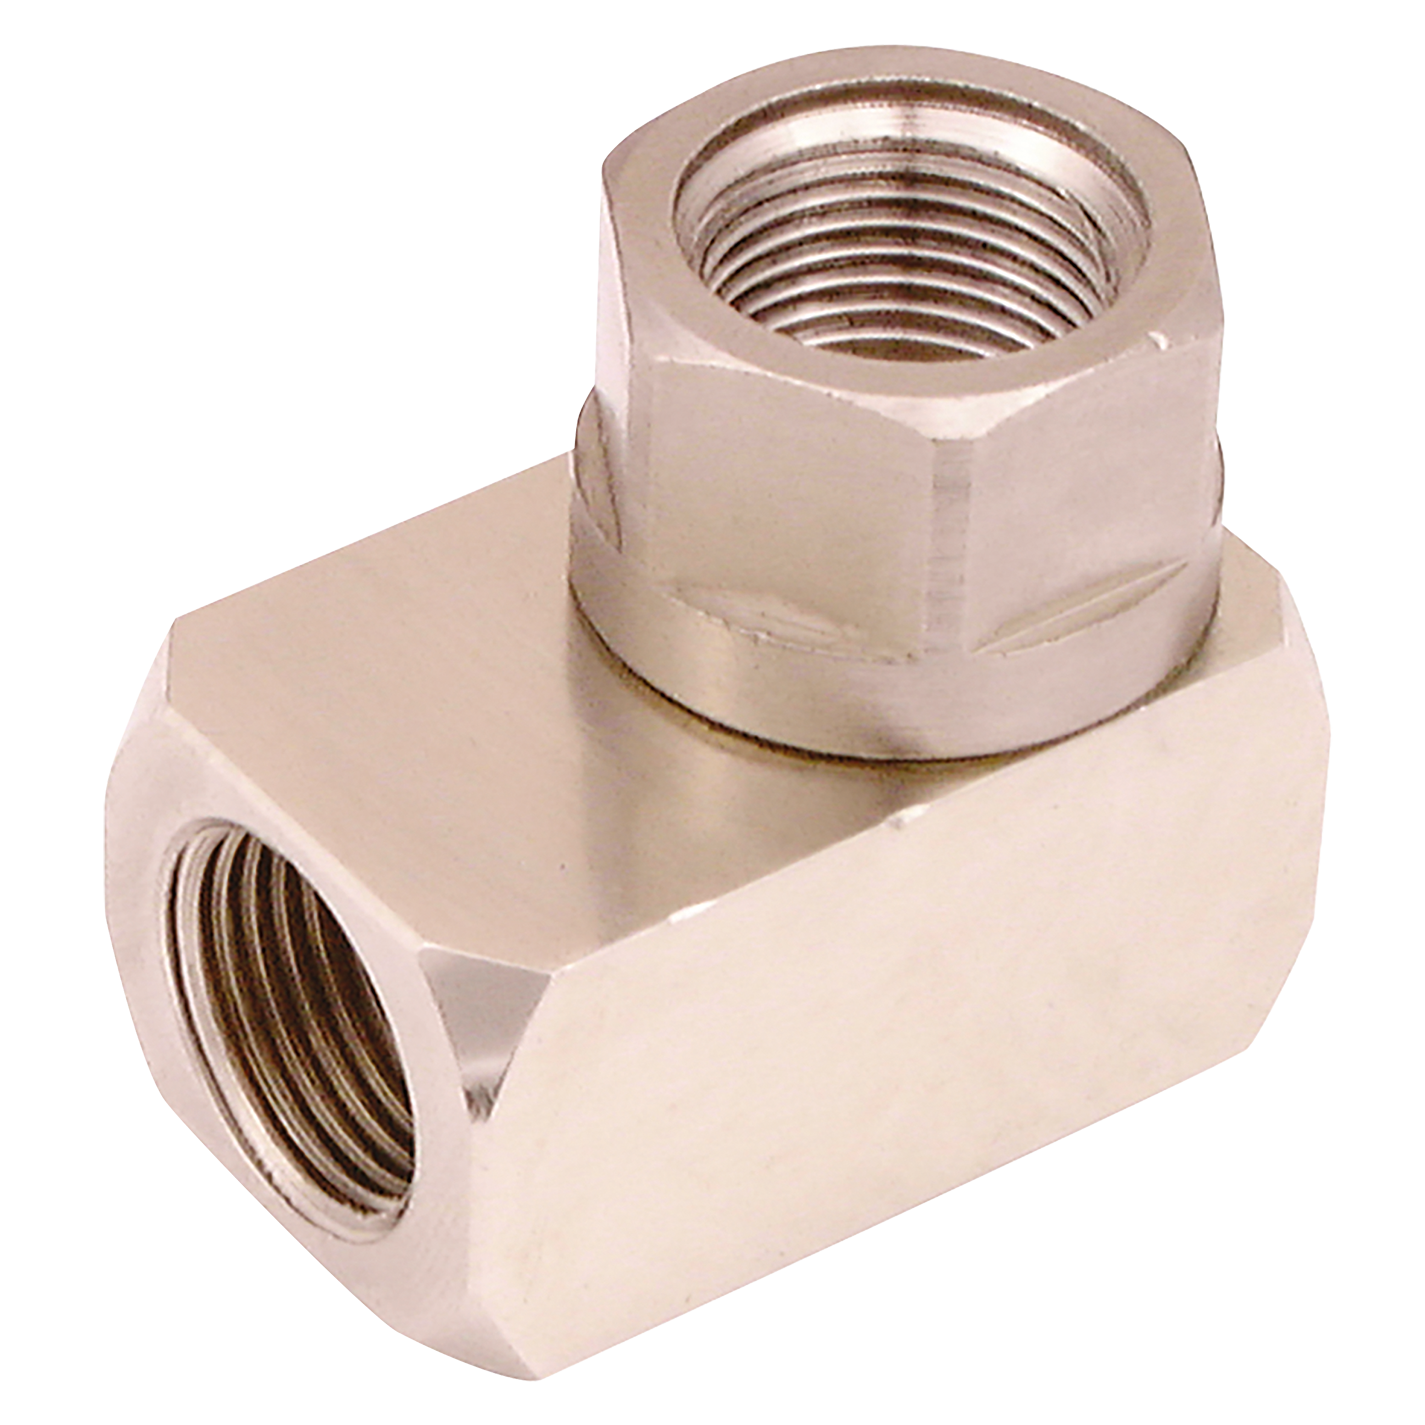 1 x 3/8" BSP Male Inlet x 1 x 3/8" BSP Female Outlets  Rotating Joint